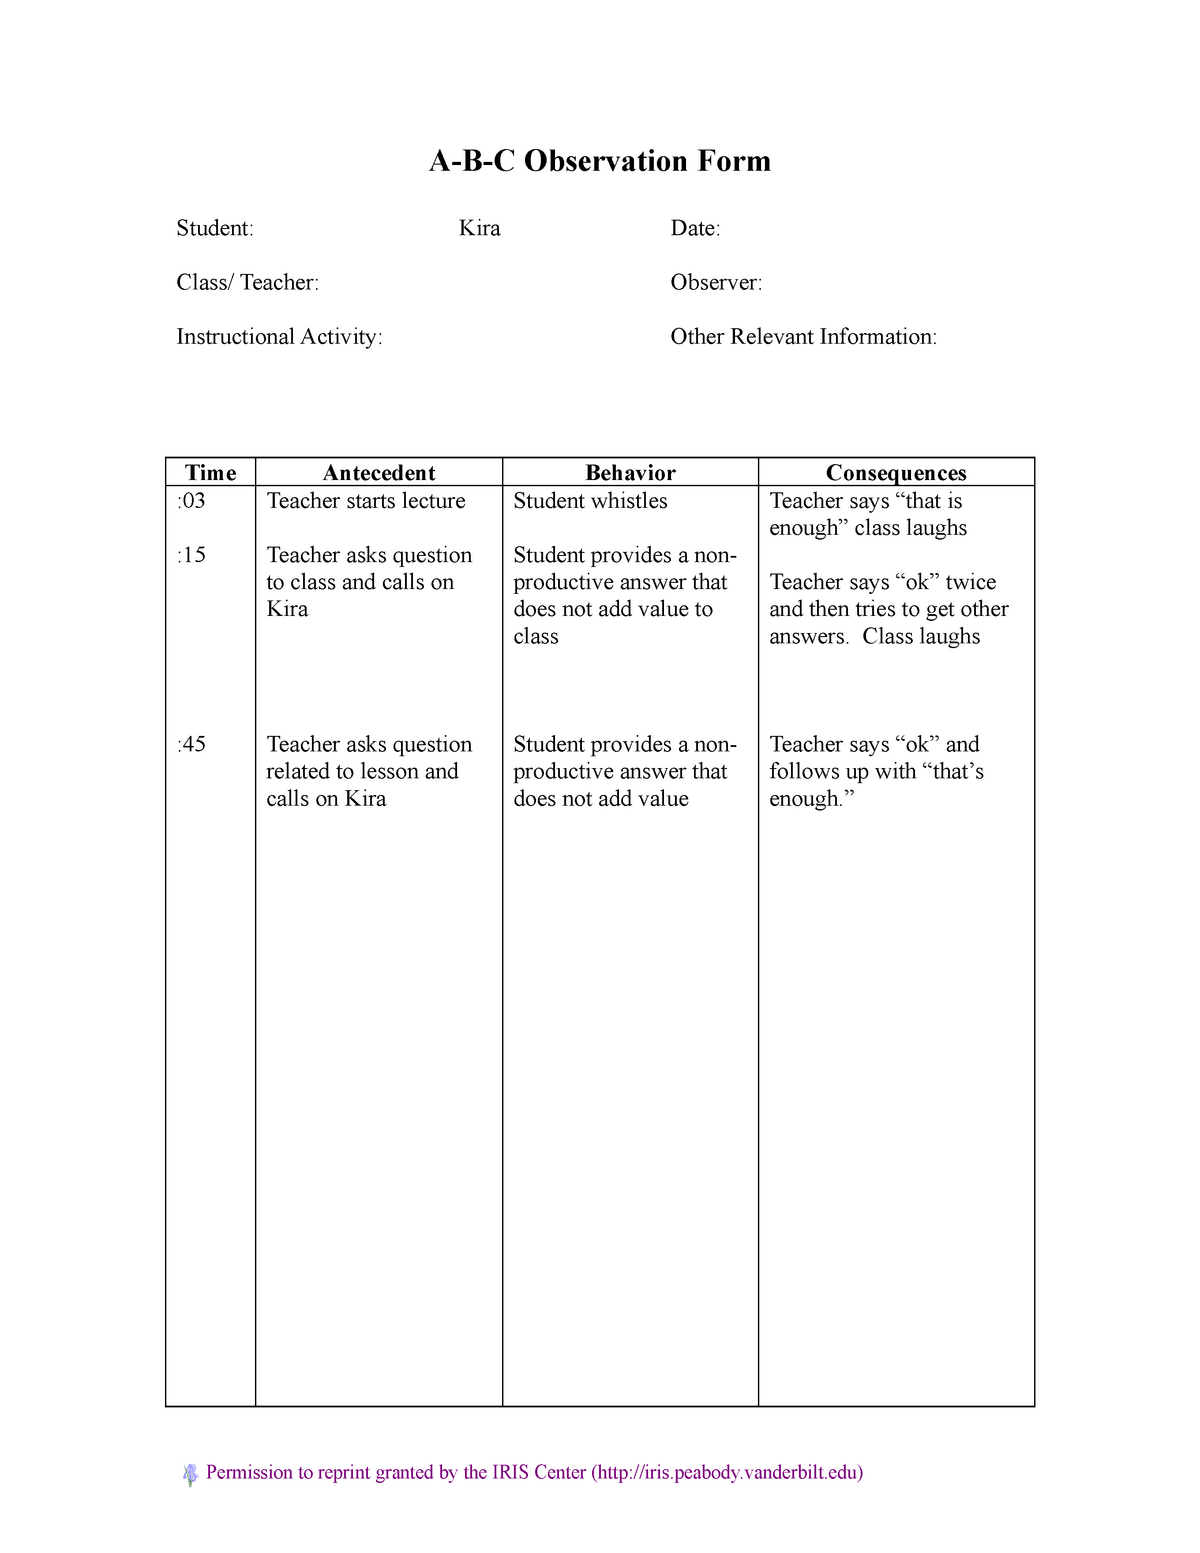 abc-fba-notes-a-b-c-observation-form-student-kira-date-class